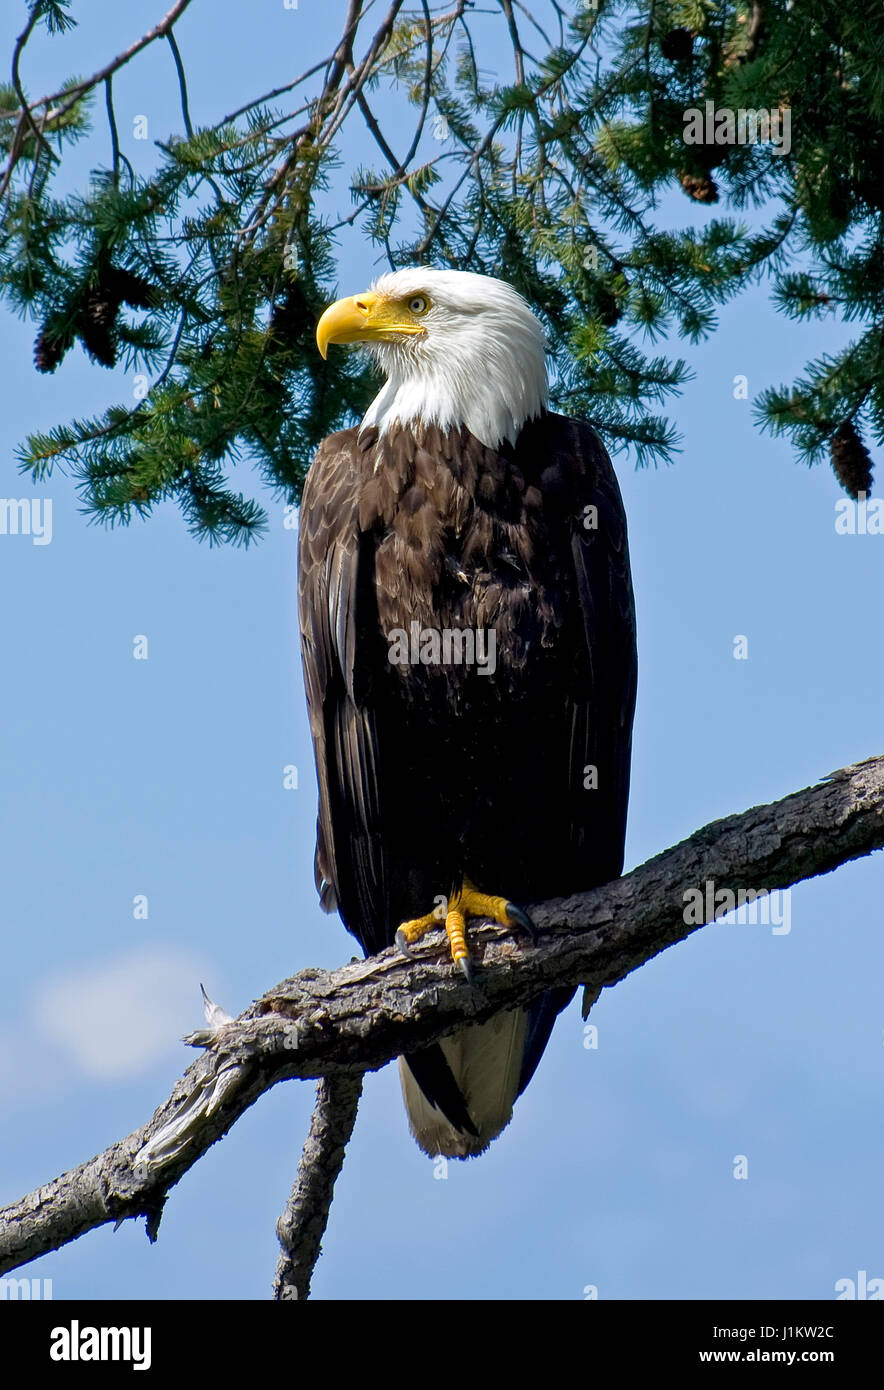 A wild parent Bald Eagle watching over its nest and the photographer. Found in abundance around the Gulf Islands of British Columbia, Canada. Stock Photo